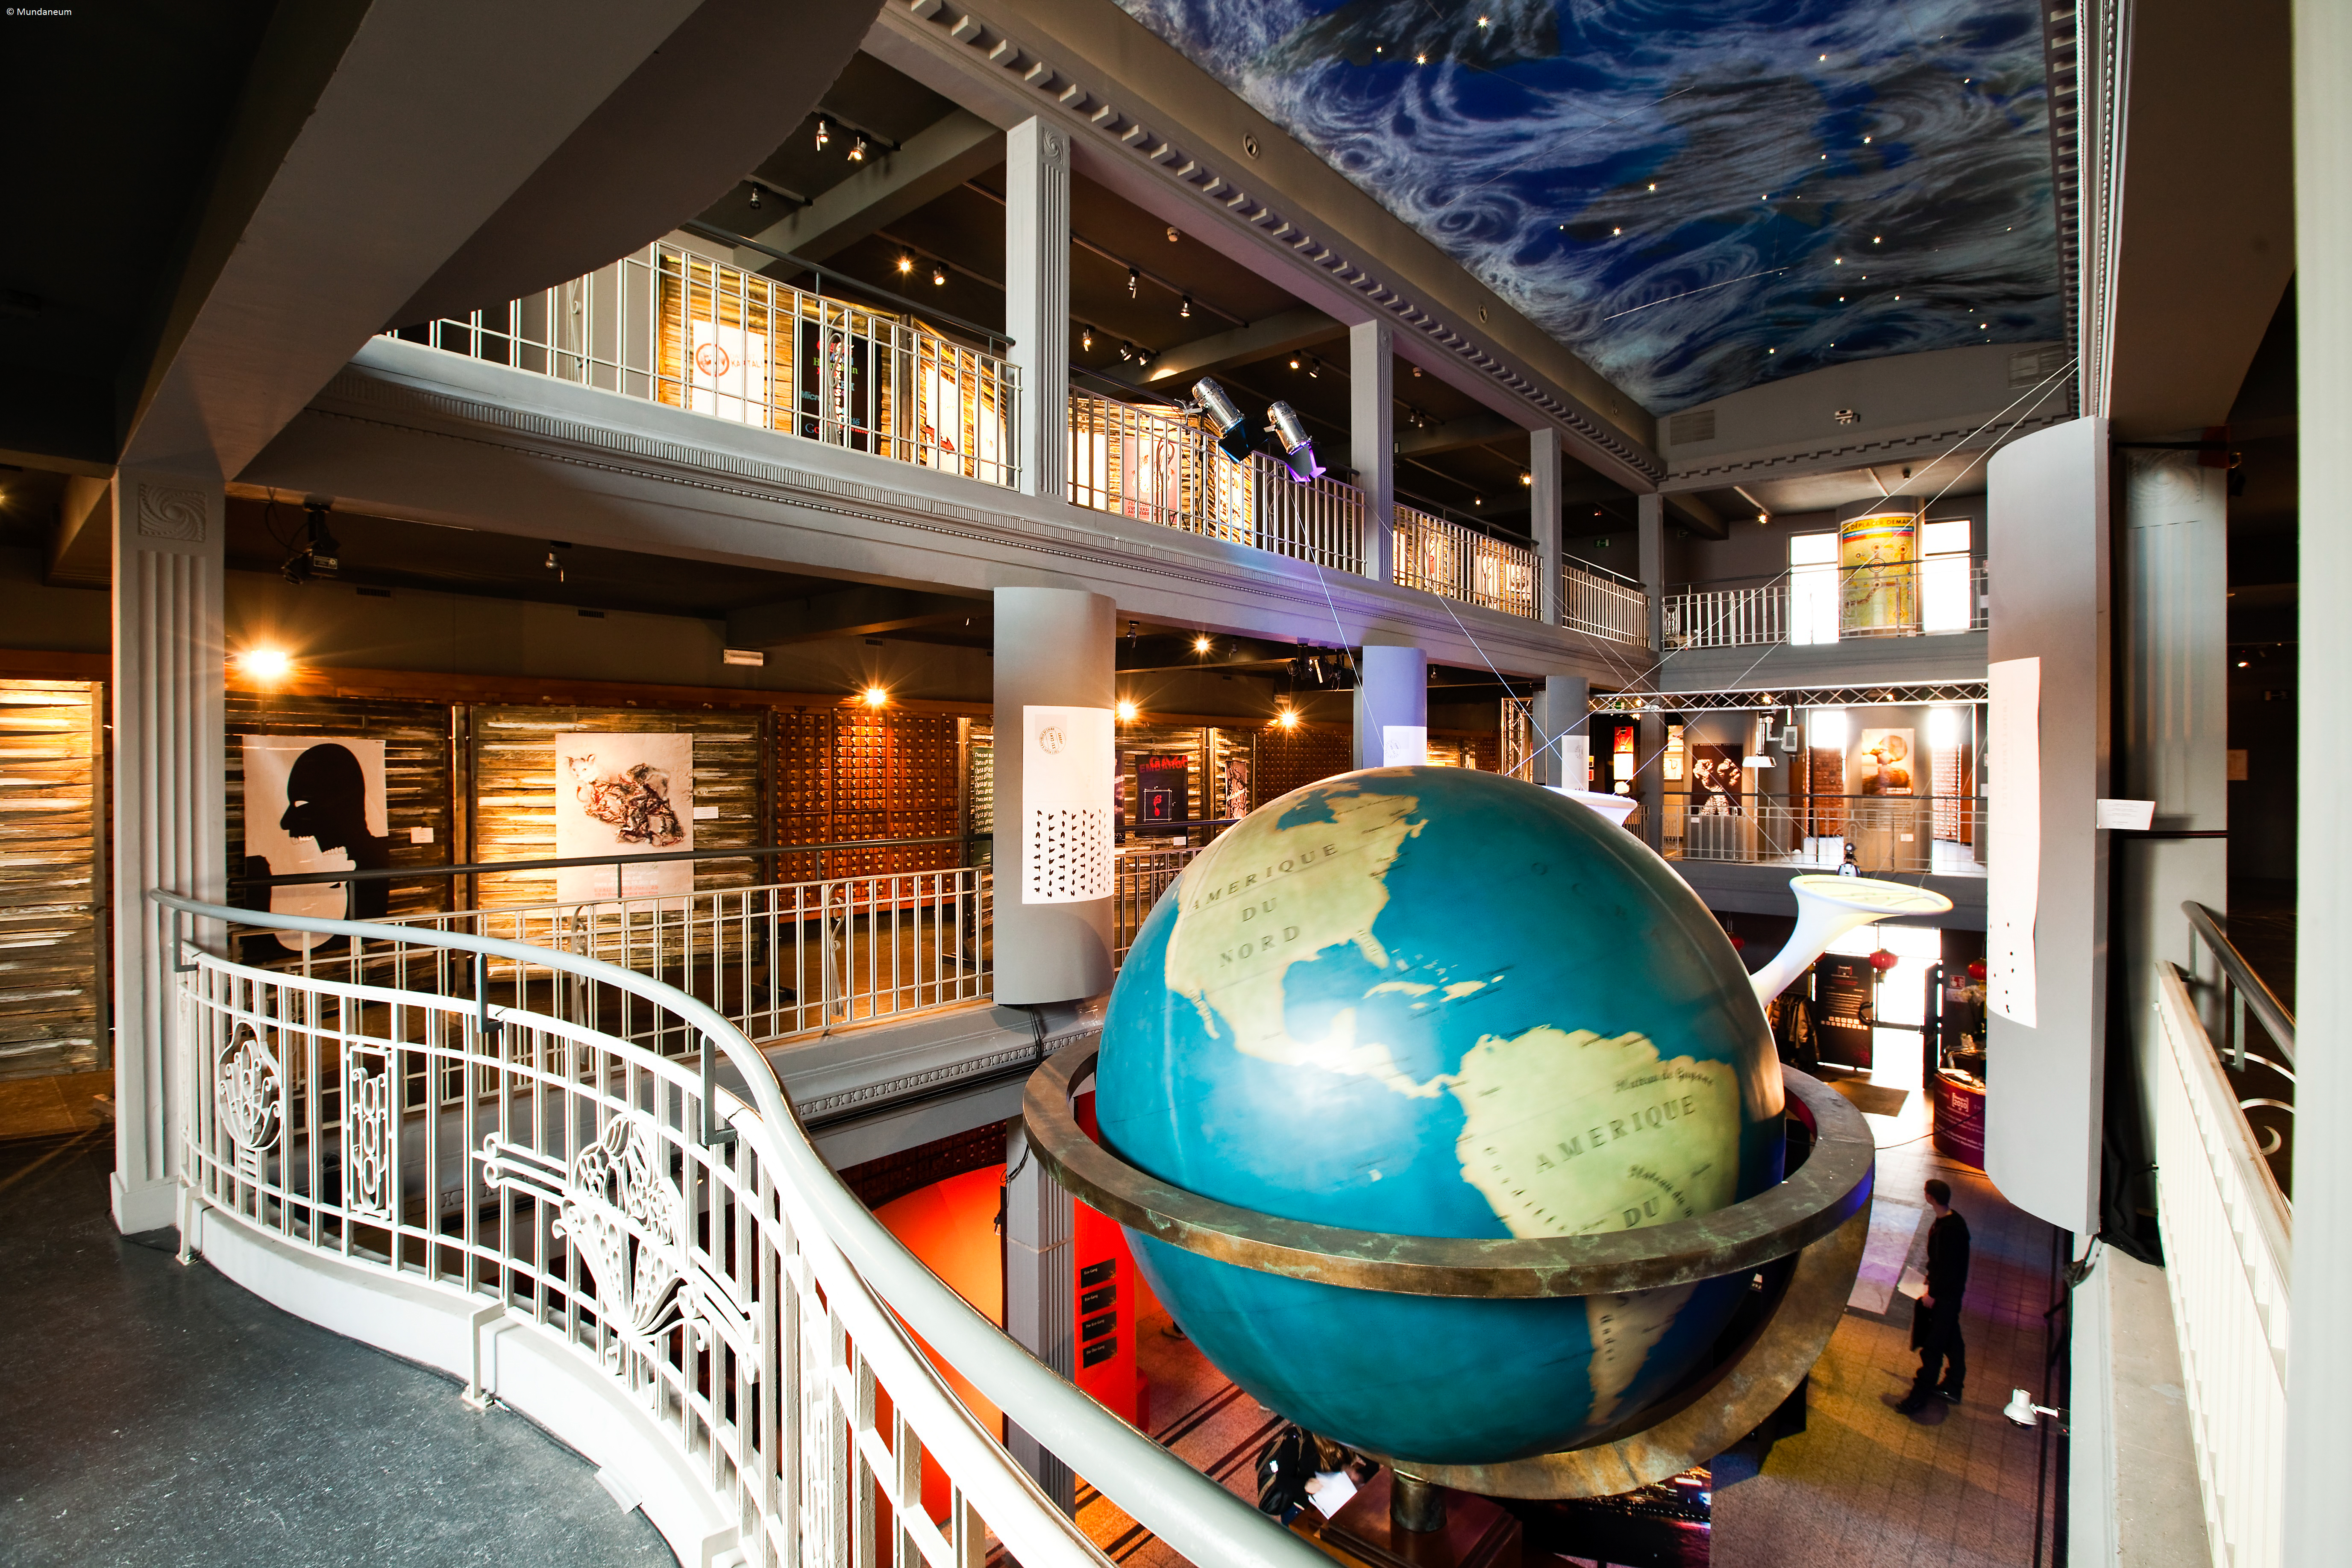 Come and learn about the world at the Mudaneum in Mons